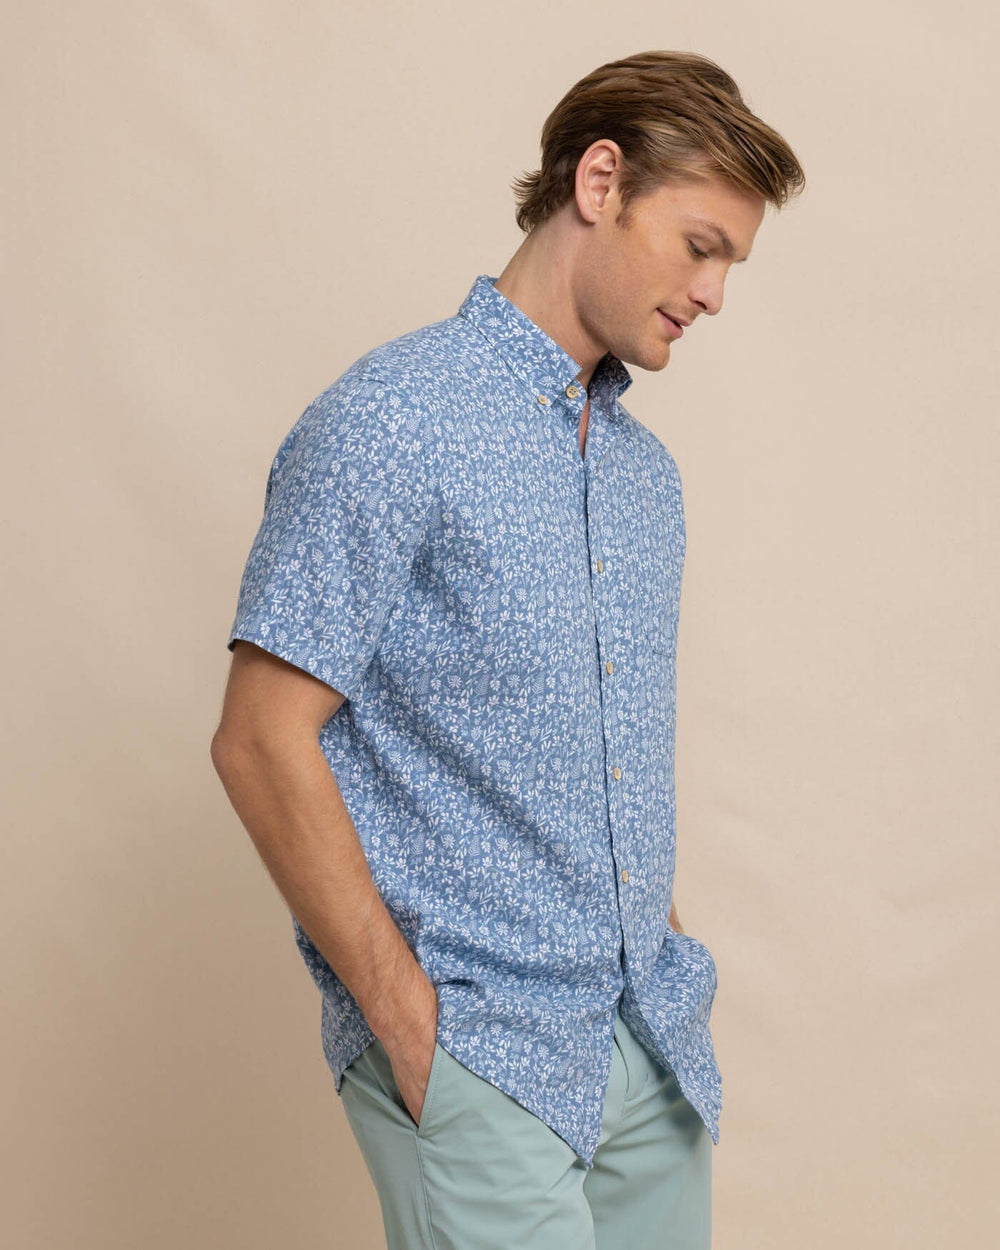 The front view of the Southern Tide Linen Rayon Ditzy Floral Short Sleeve Sport Shirt by Southern Tide - Coronet Blue